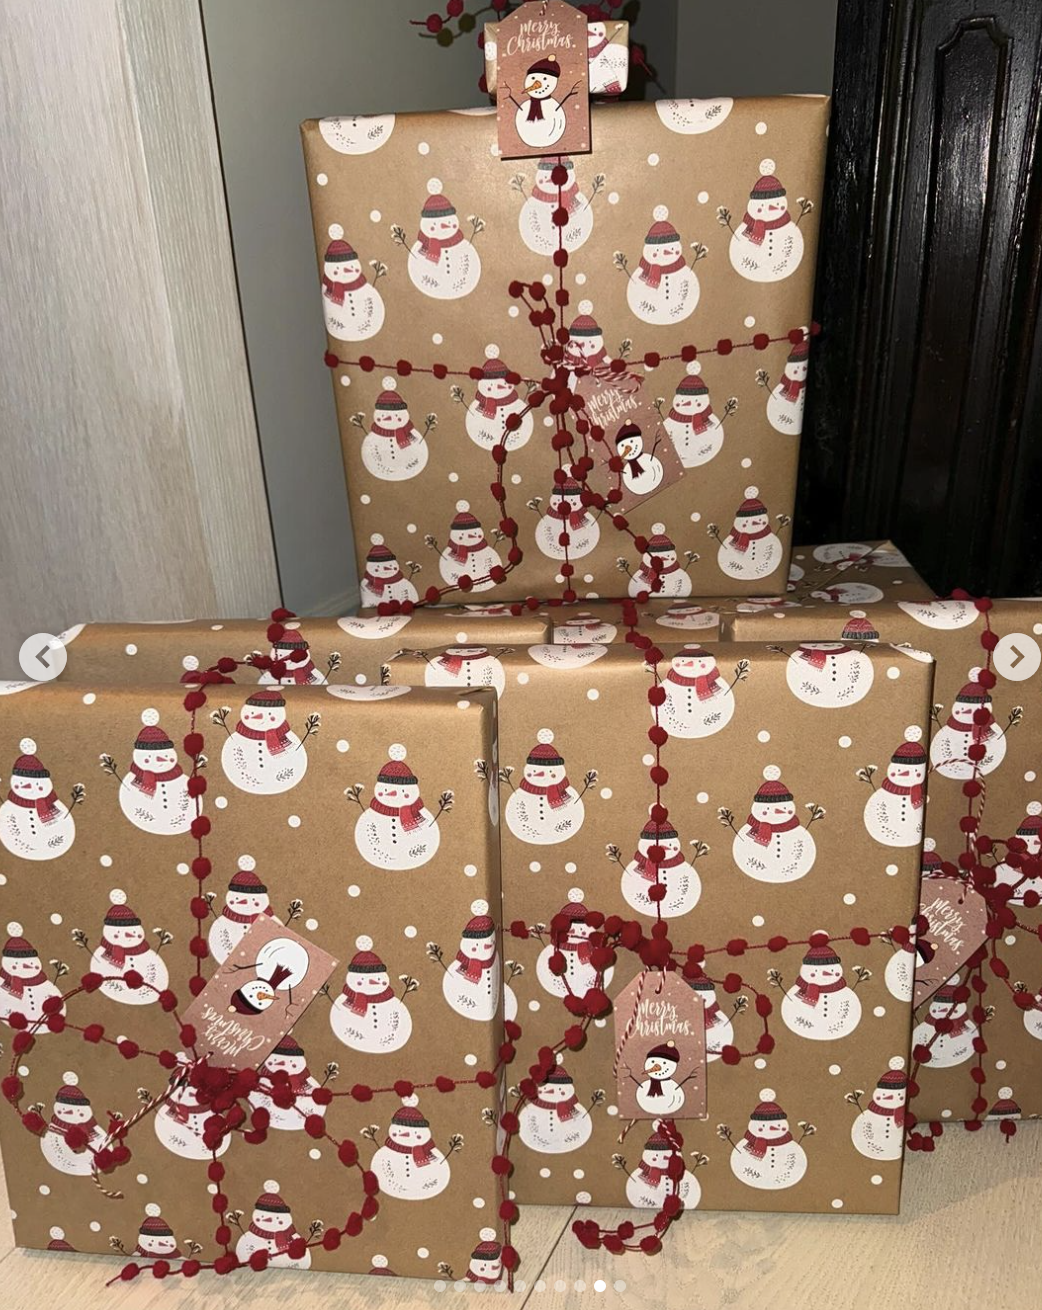 Gifts with snowman wrapping paper and ribbon that looks like strings of small red balls